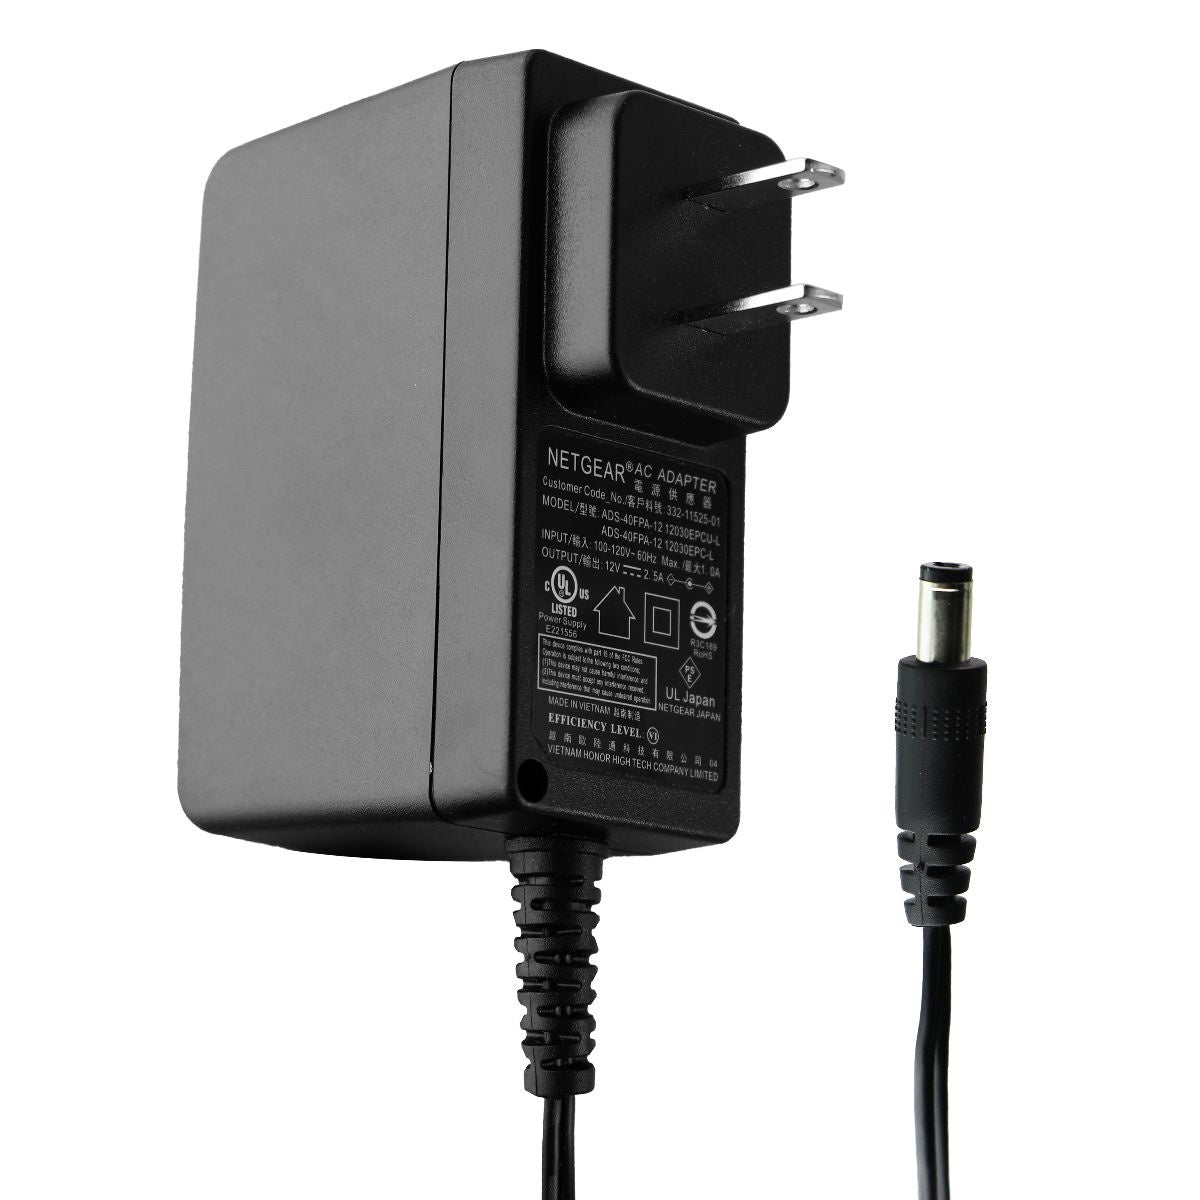 NetGear (12V/2.5A) AC Adapter Wall Charger - Black (ADS-40FPA) Multipurpose Batteries & Power - Multipurpose AC to DC Adapters Netgear    - Simple Cell Bulk Wholesale Pricing - USA Seller